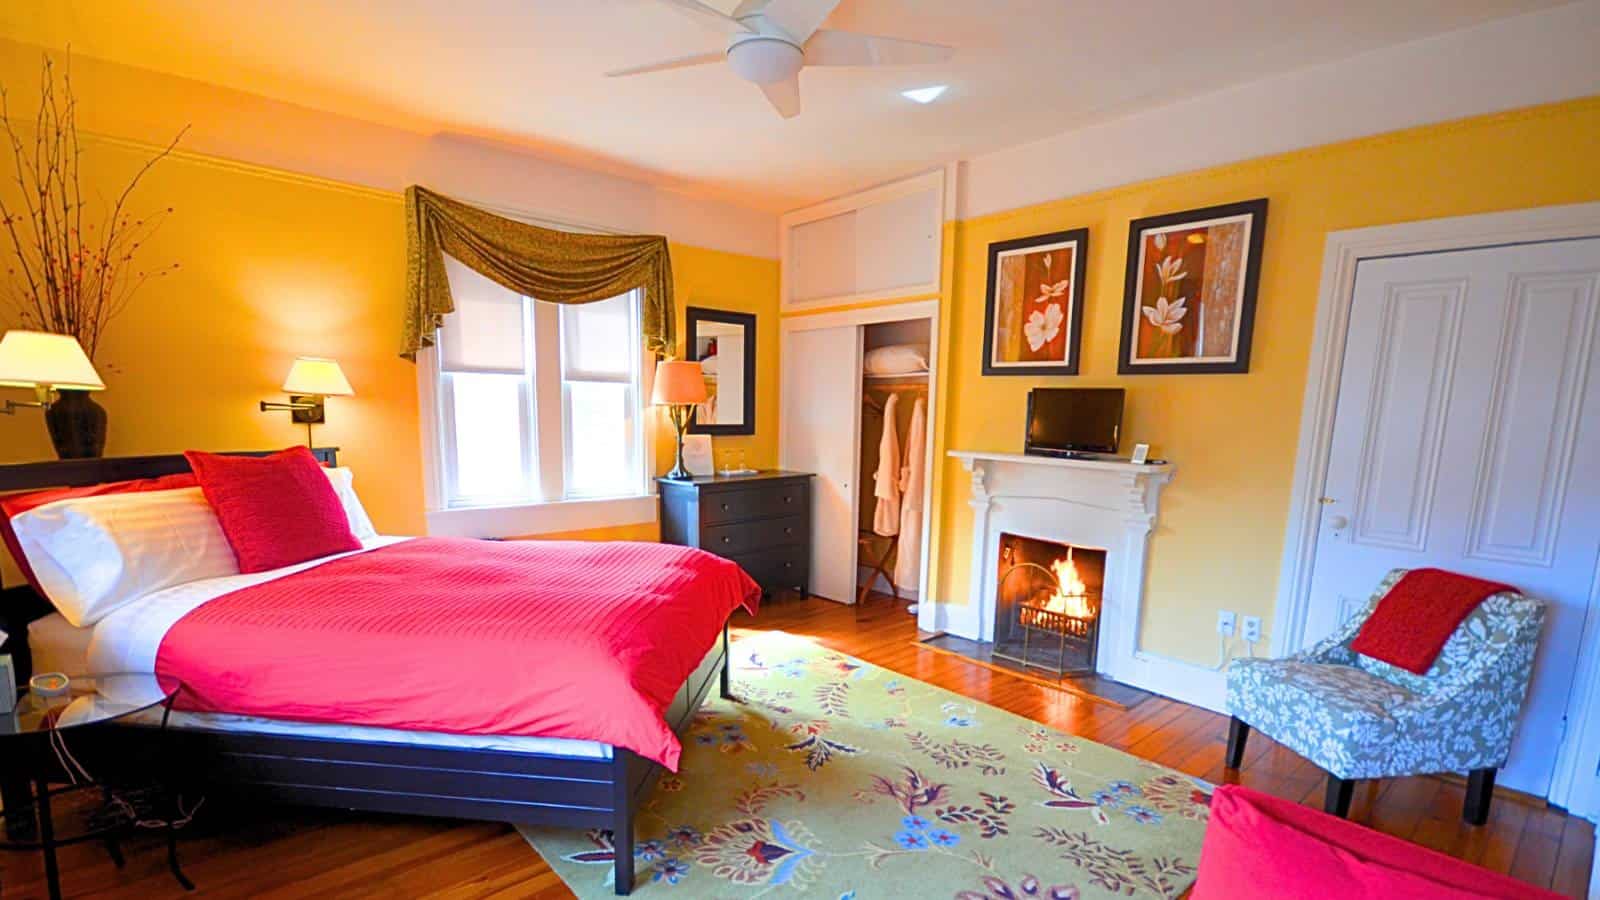 Bedroom with yellow walls, hardwood flooring, dark wooden bed, red bedding, fireplace, dresser, and upholstered armchair